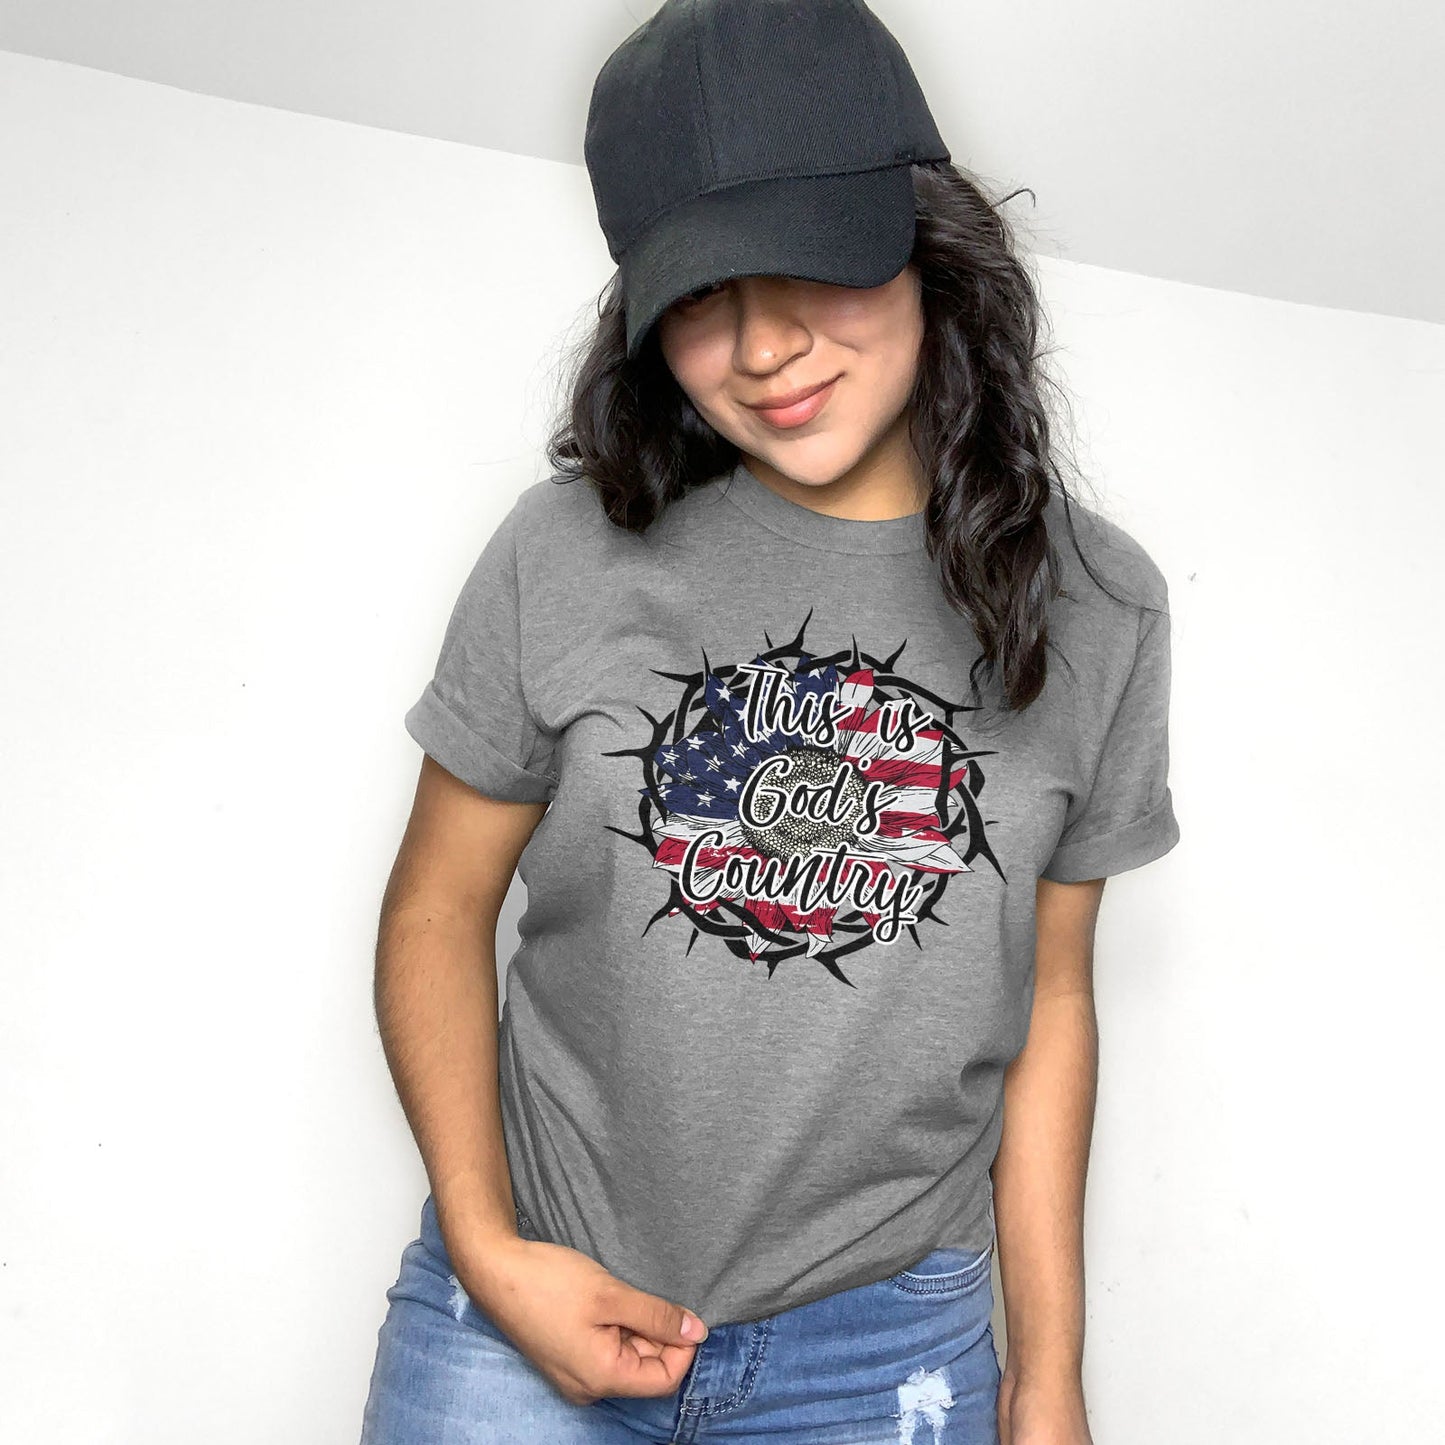 This Is God's Country Tee Shirts For Women - Christian Shirts for Women - Religious Tee Shirts